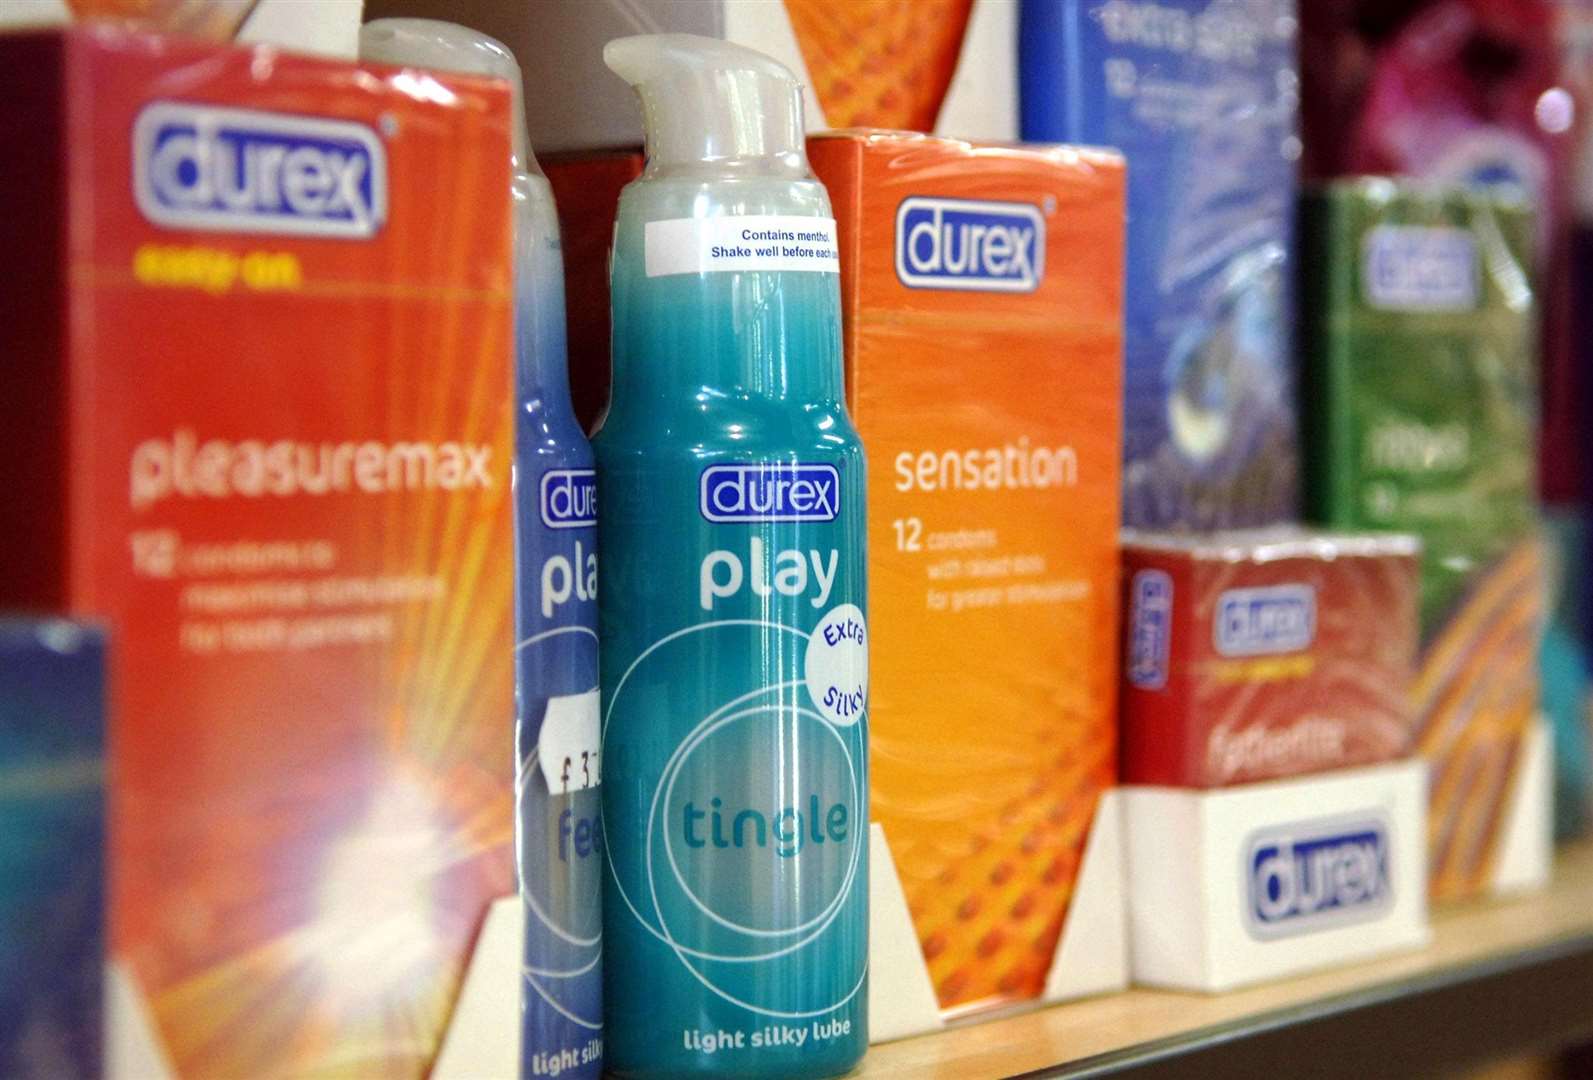 RB’s Durex division has seen a fall in sales due to social distancing rules (Stefan Rousseau / PA)